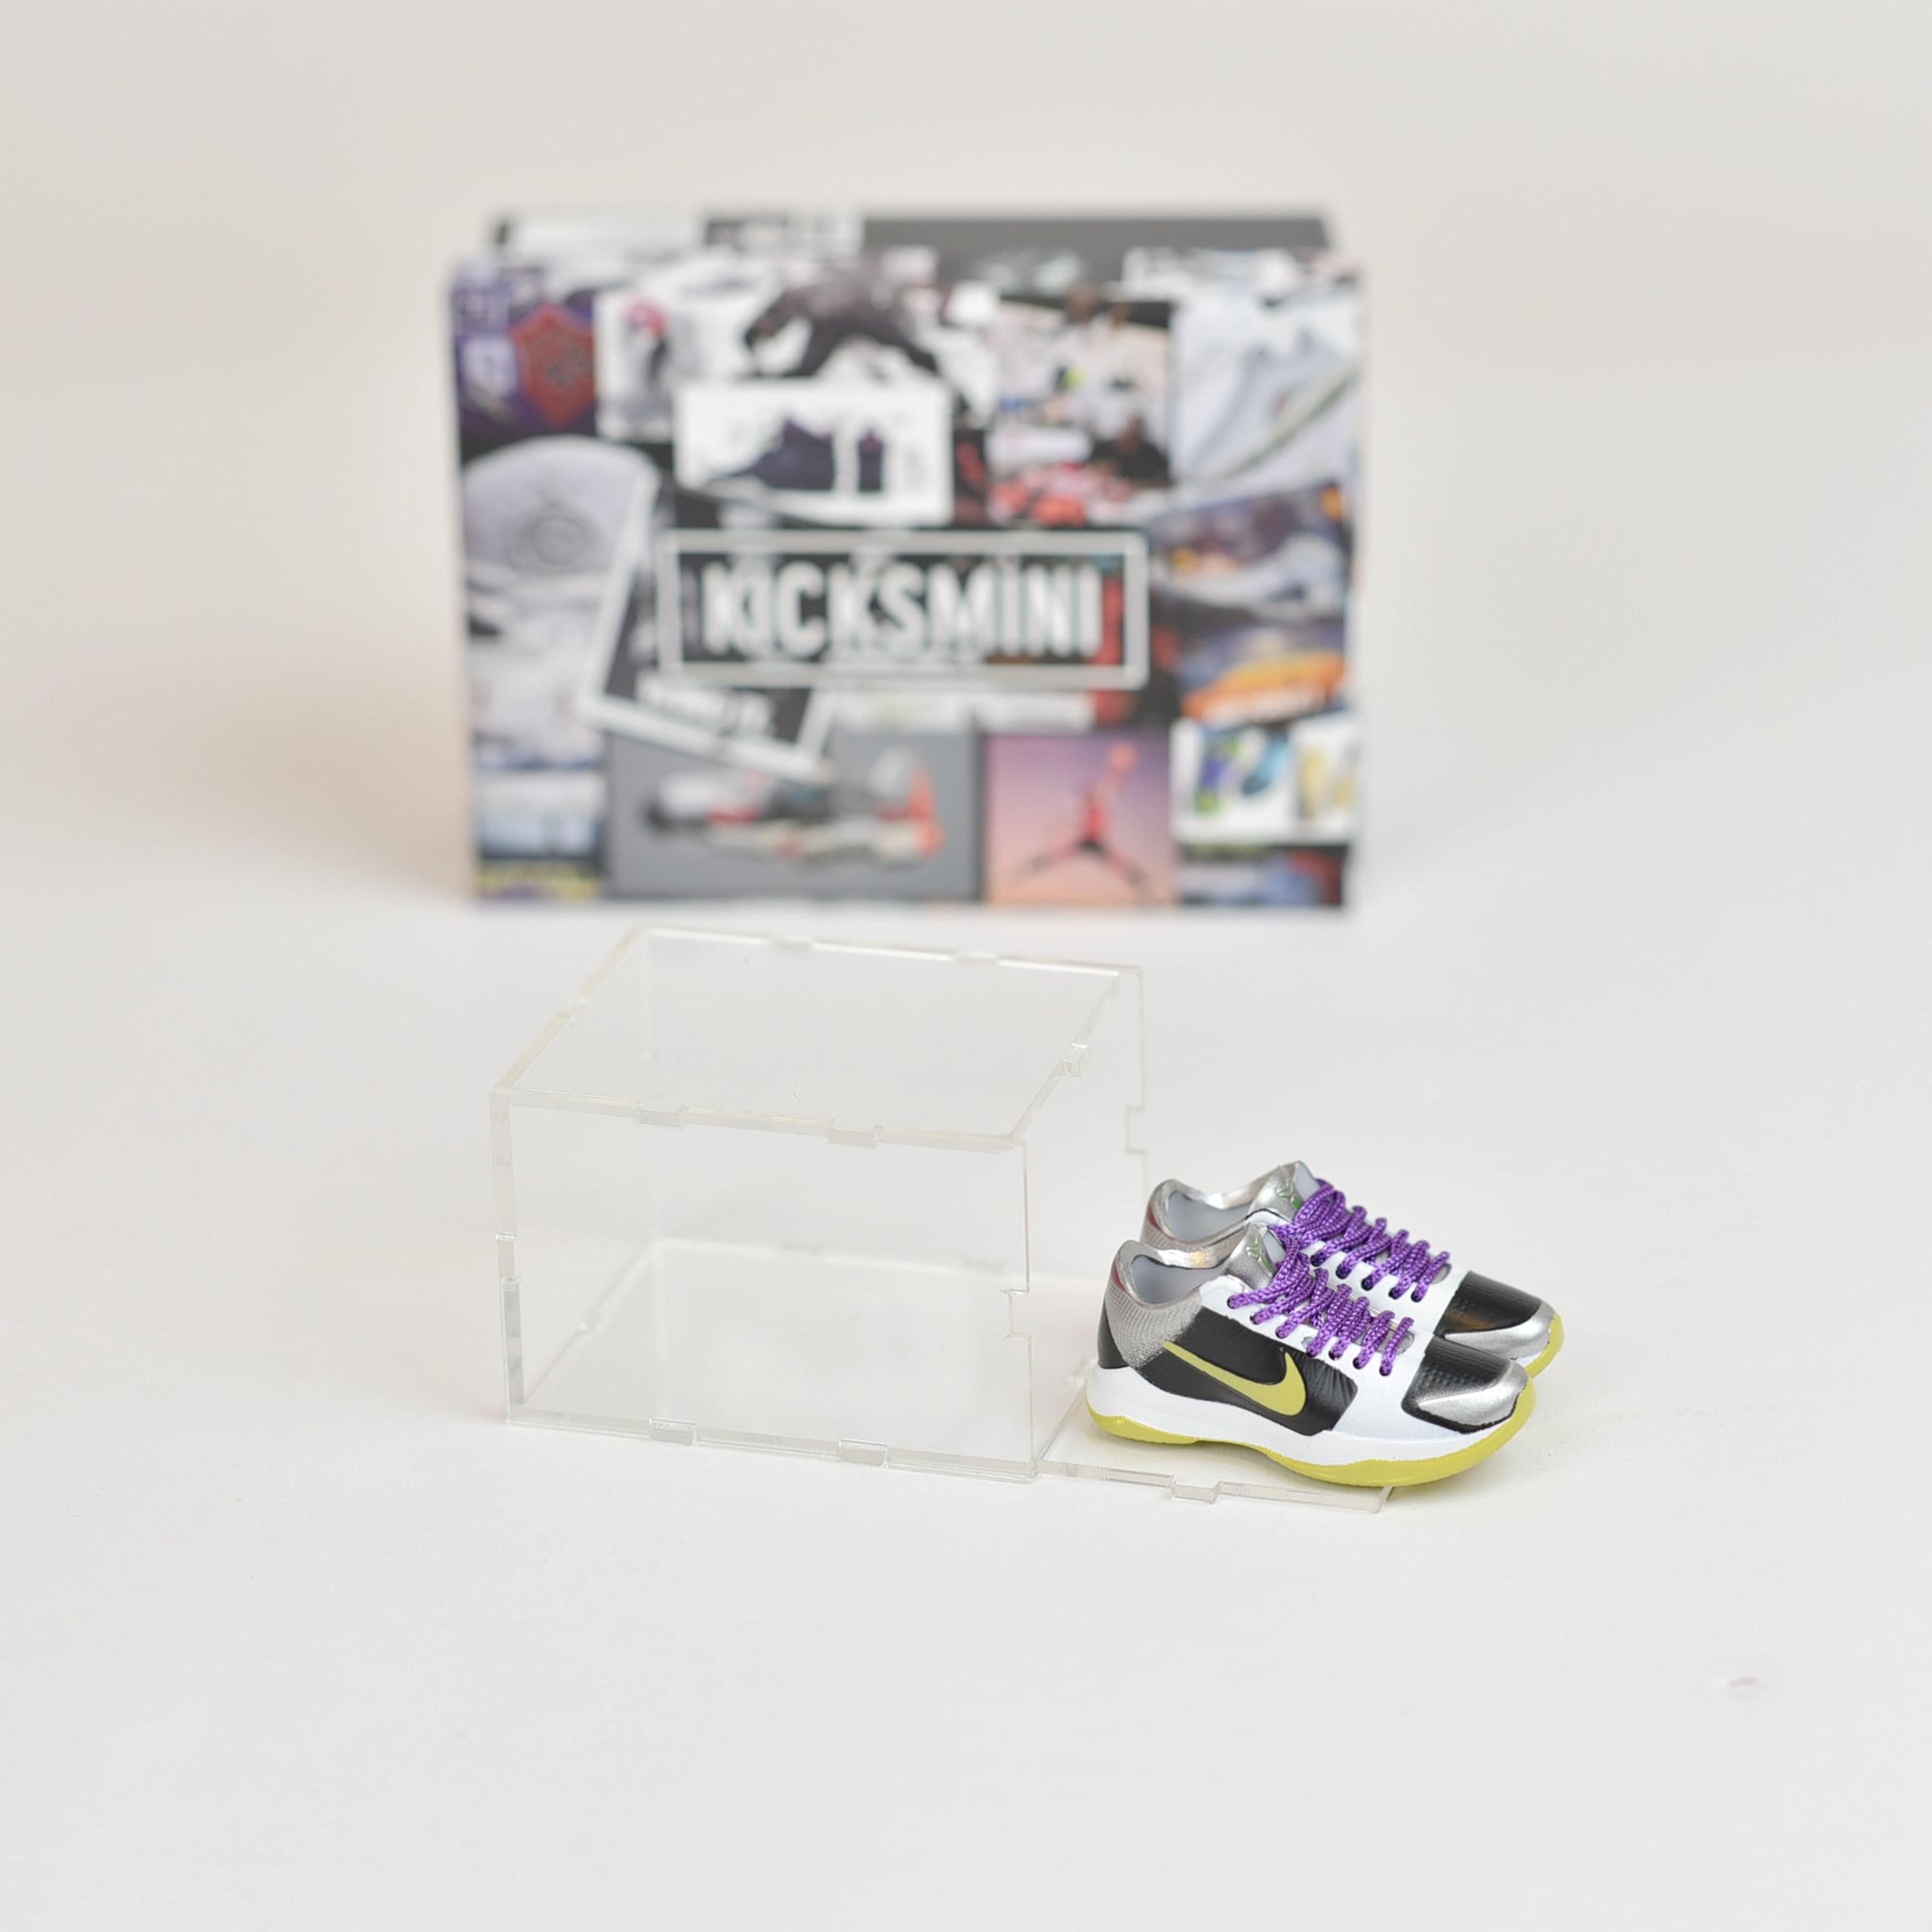 Alternate View 15 of Kobe Bryant/LeBron James/Steph Curry Mini Sneaker Collection wit